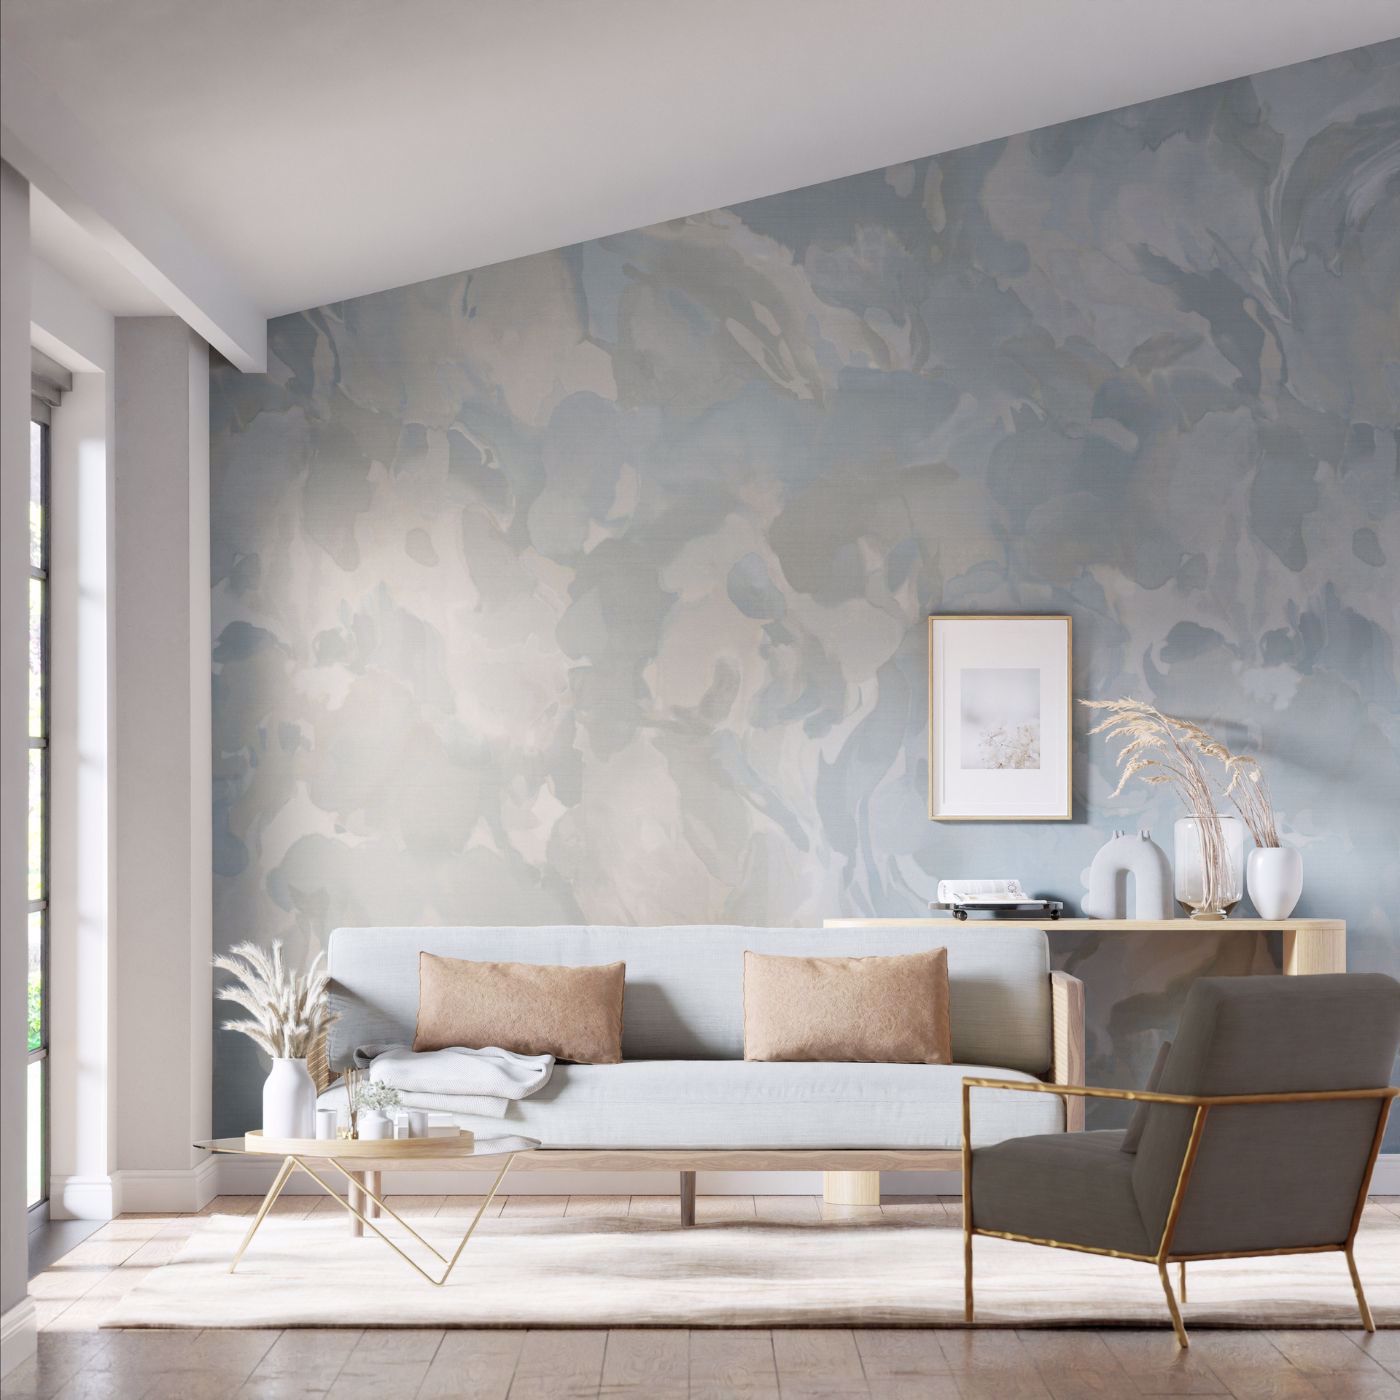 Foresta Ethereal/Parchment Wallpaper by HAR